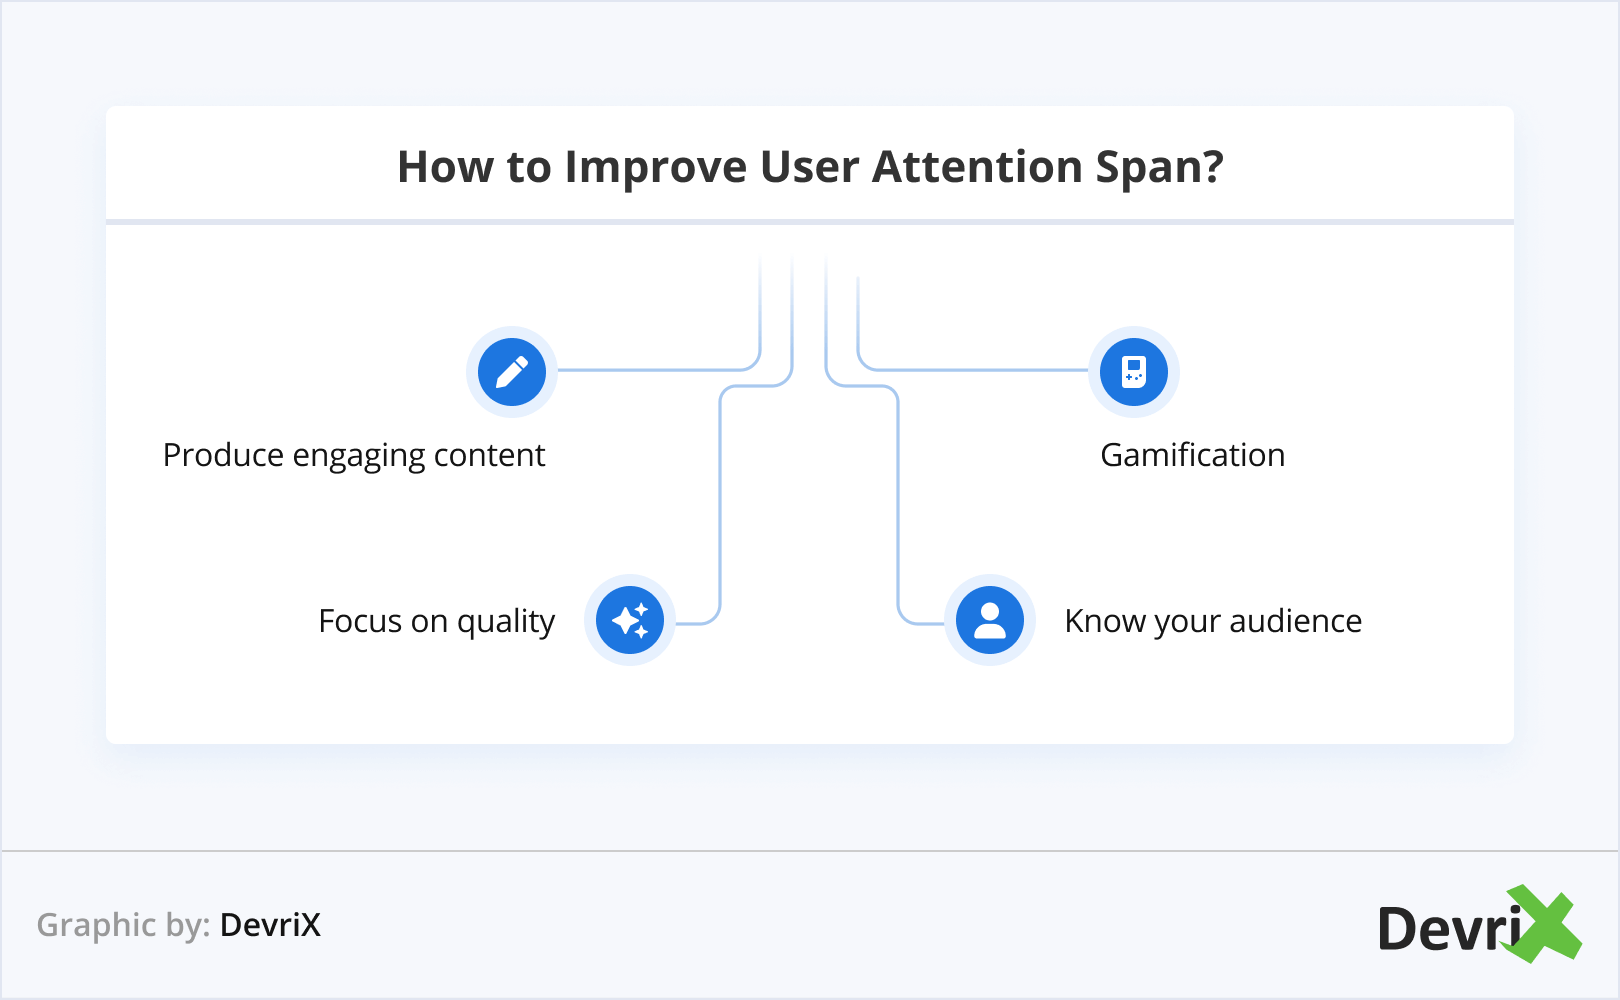 How to Improve User Attention Span